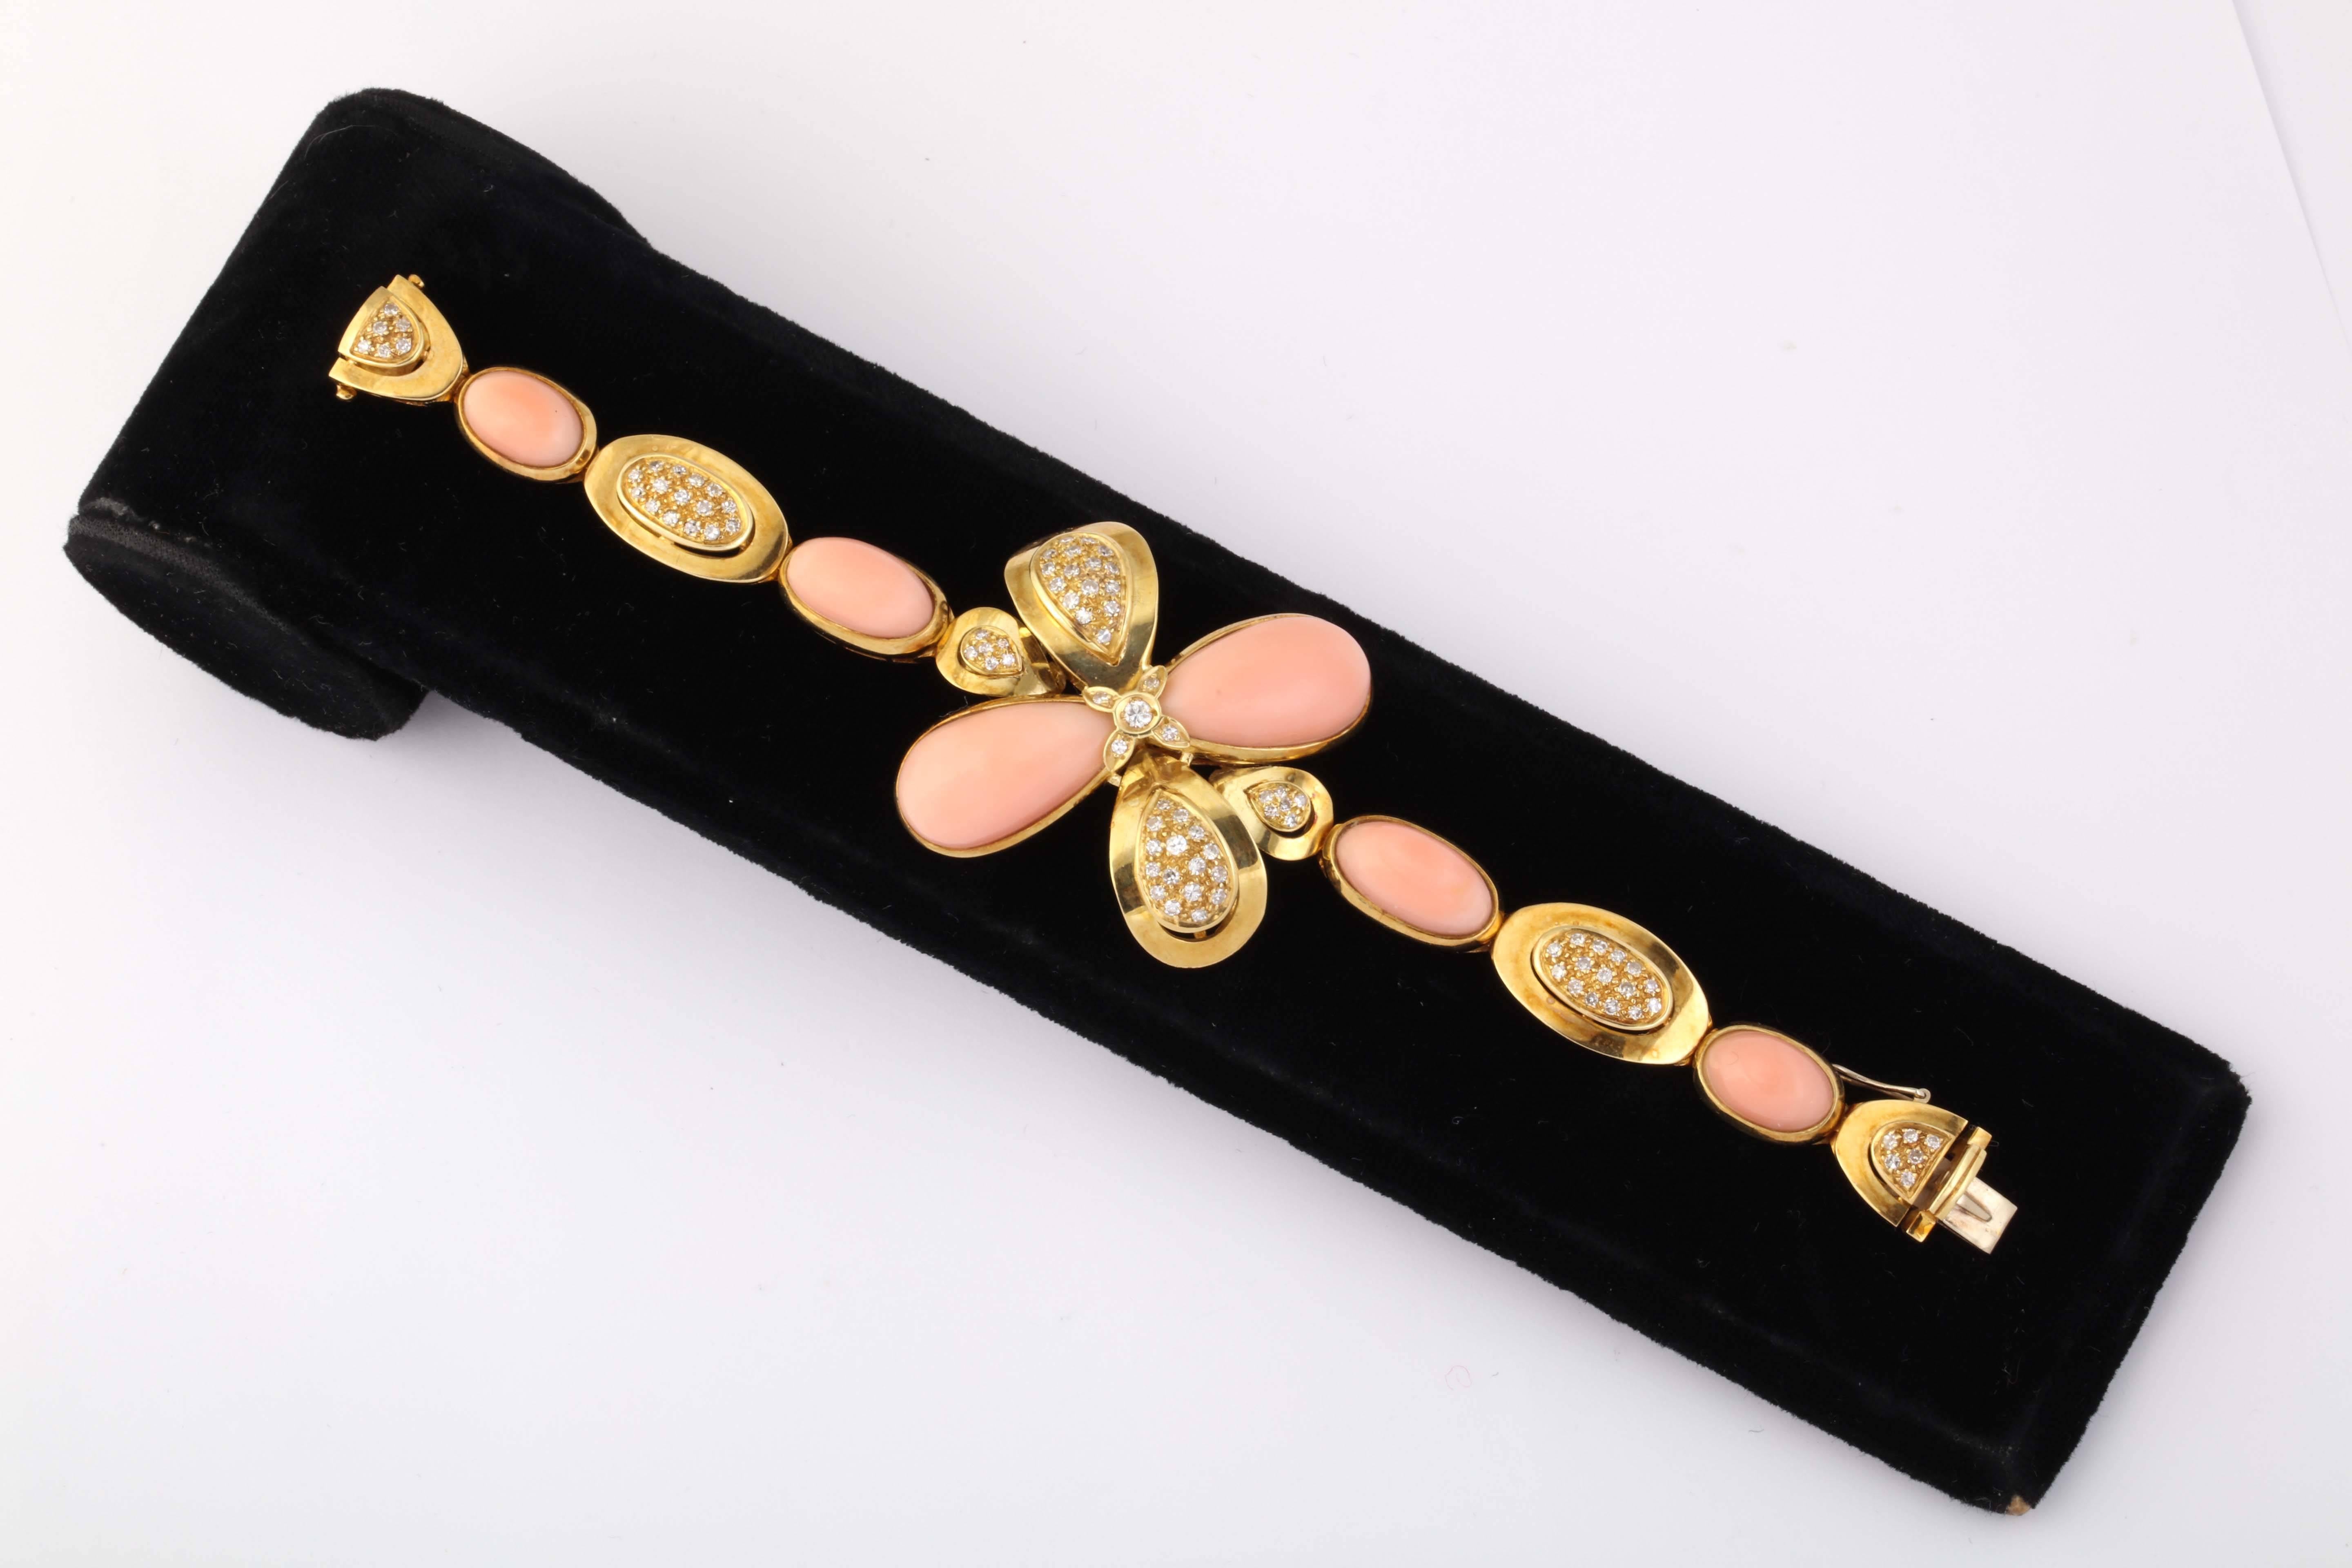 One Ladies Bracelet Composed Of A Large Floret Design In Center Of Piece . Each Angel Skin Coral Approximately 23 mm in length In Each Of The Two Pieces In The Center. The Remaining Four Corals In Link of Bracelet Measuring Approximately 10 Mm Each.